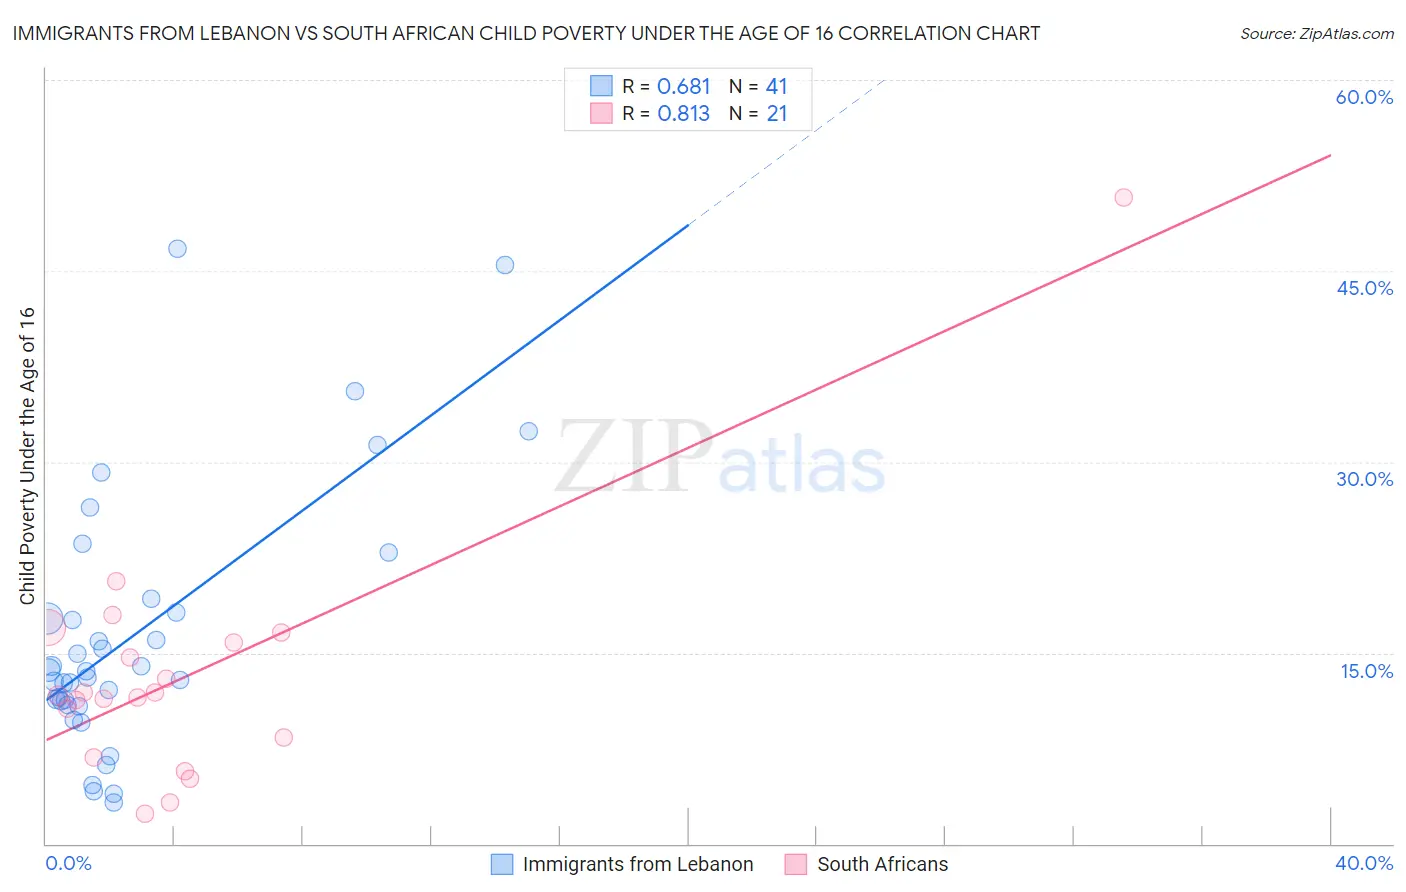 Immigrants from Lebanon vs South African Child Poverty Under the Age of 16